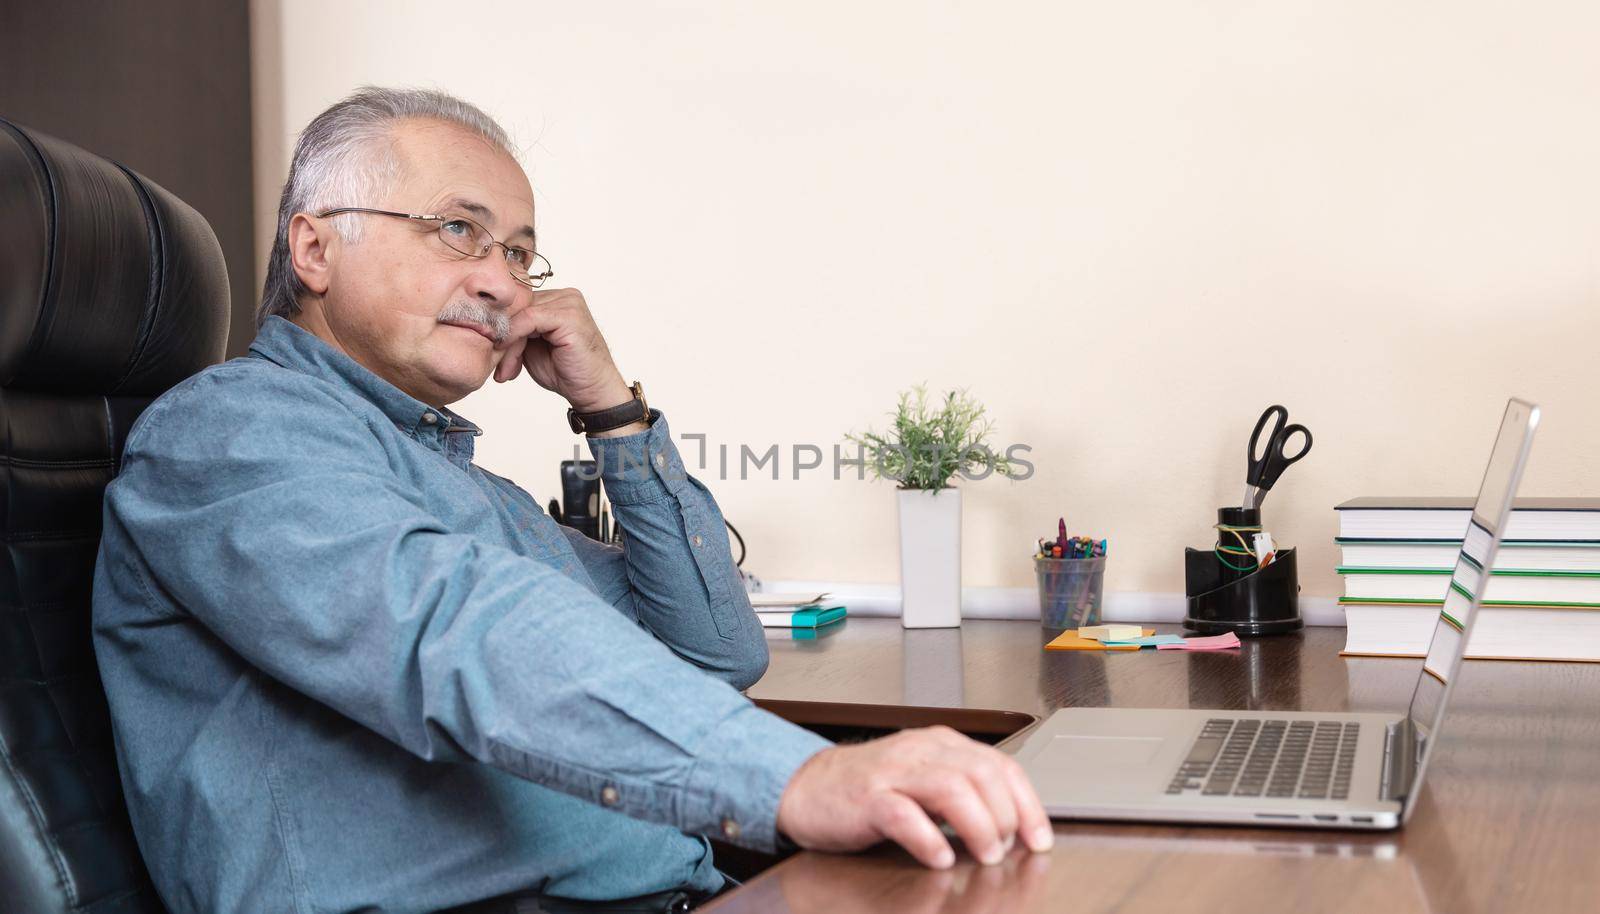 Senior businessman work at home. An elderly man in glasses is working remotely using a laptop. Remote work during coronovirus concept